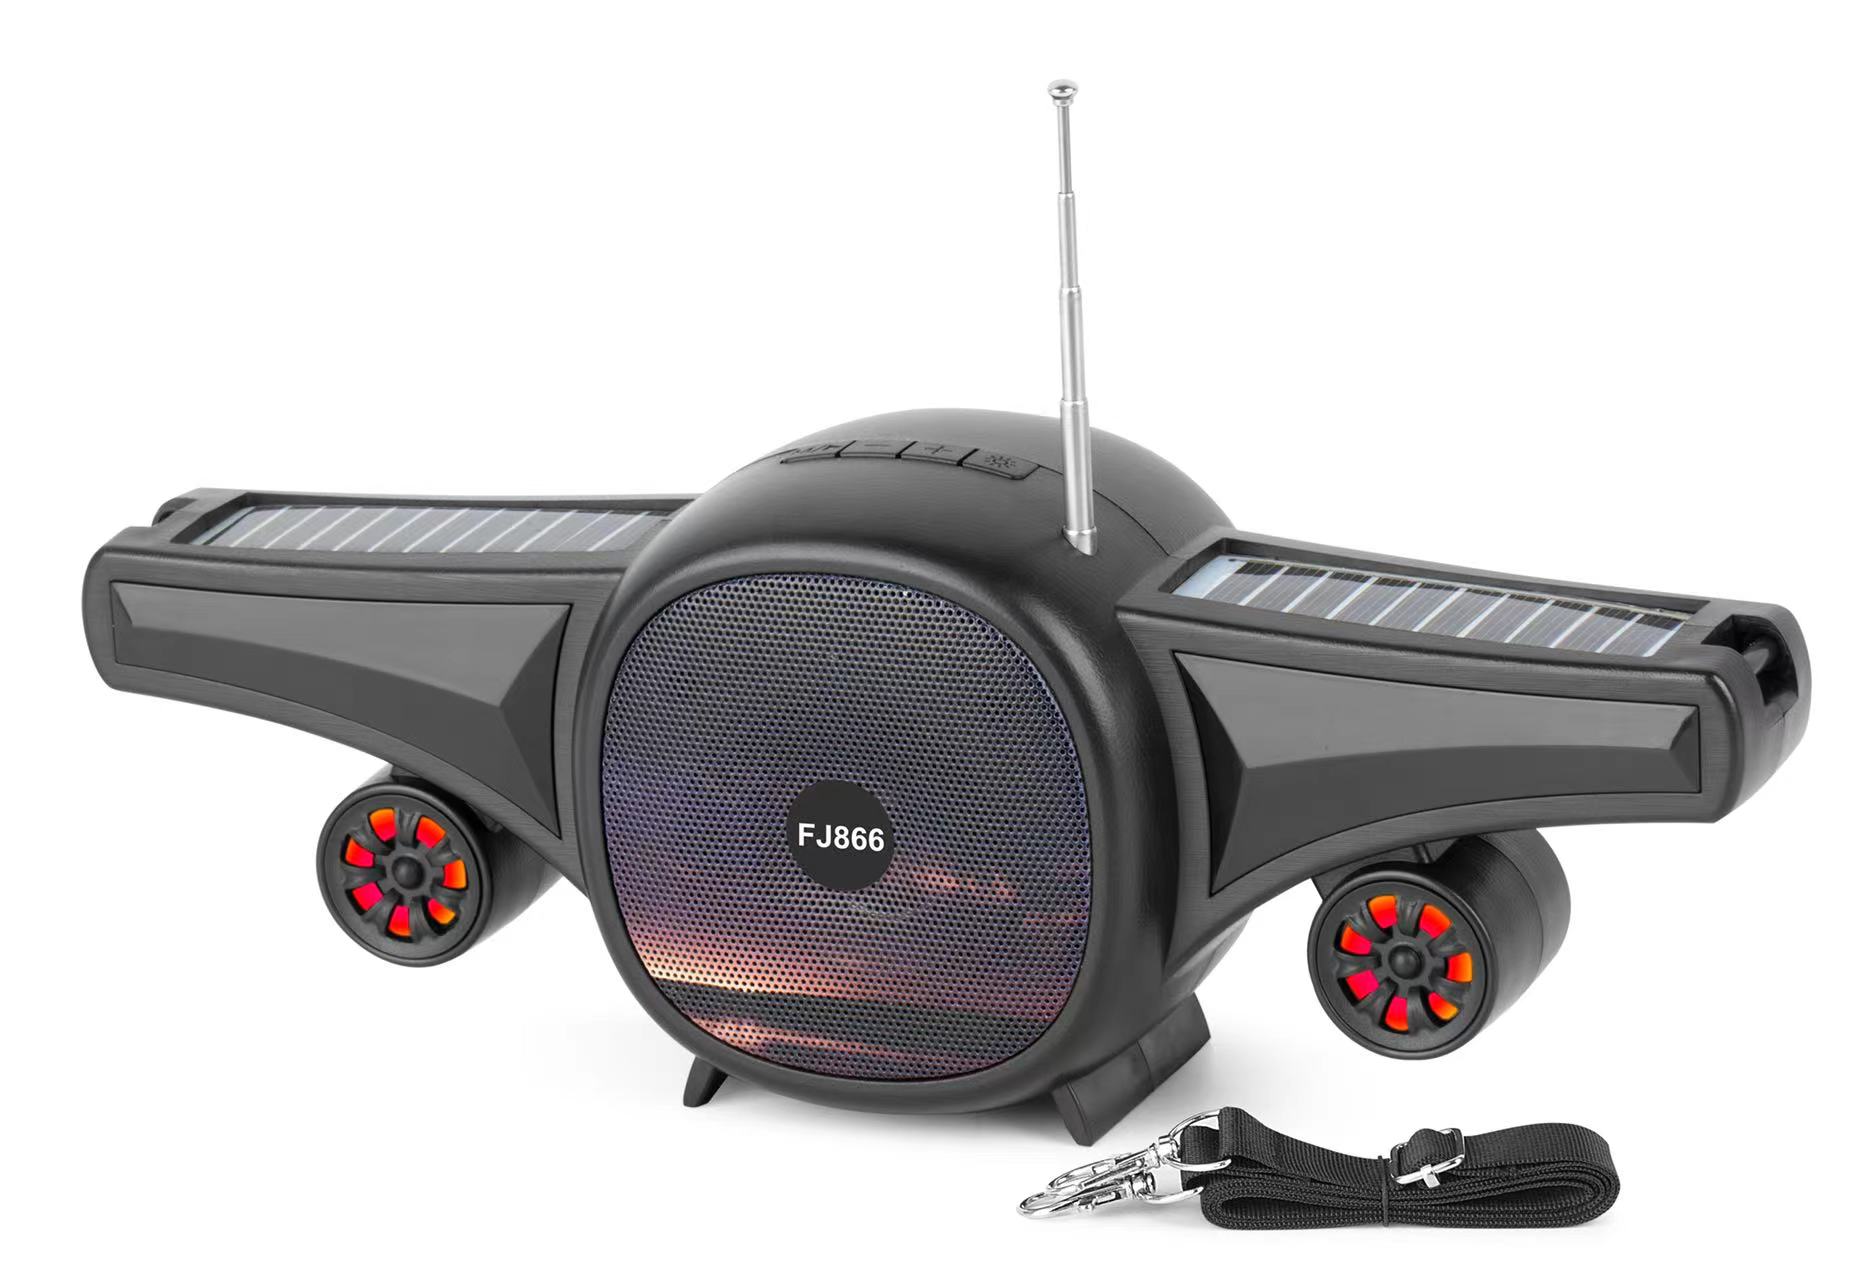 Cool Jet Airplane Colorful Portable Stereo Bluetooth Wireless Speaker with SOLAR Panel FJ866 (Black)